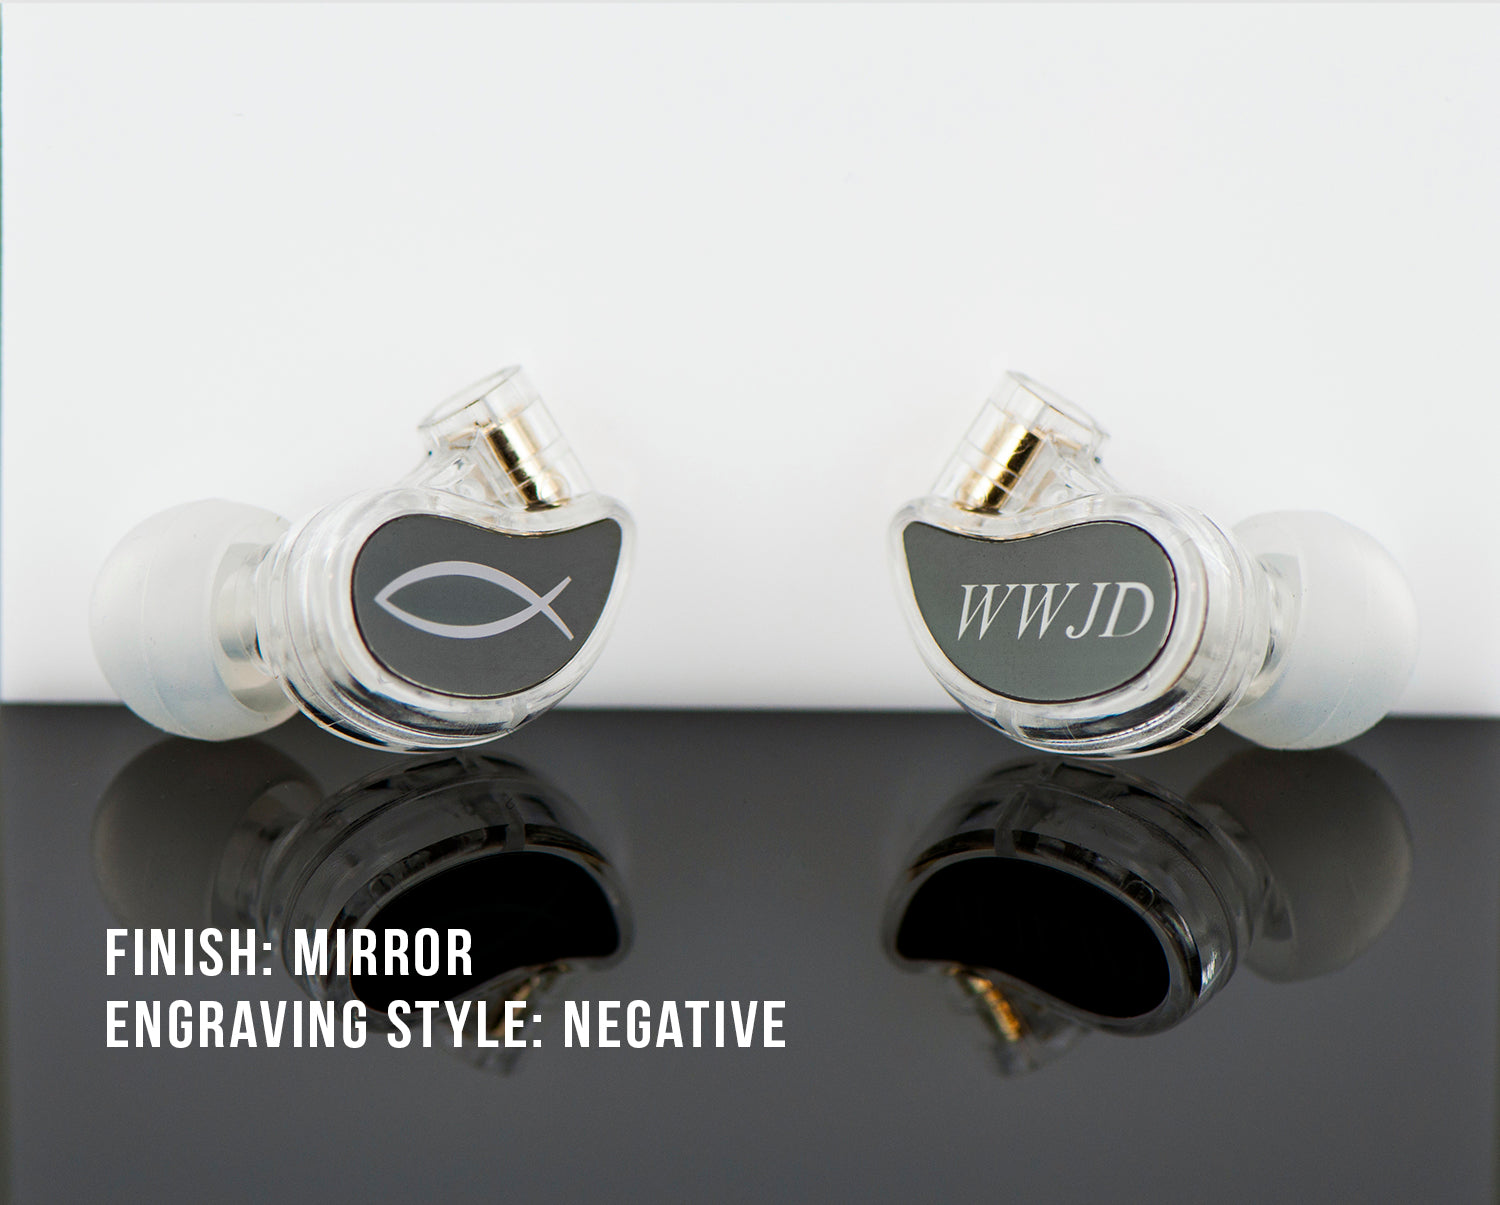 Two custom-engraved, clear in-ear monitors with mirrored finishes reflected on a glossy surface, labeled "finish: mirror, engraving style: negative.